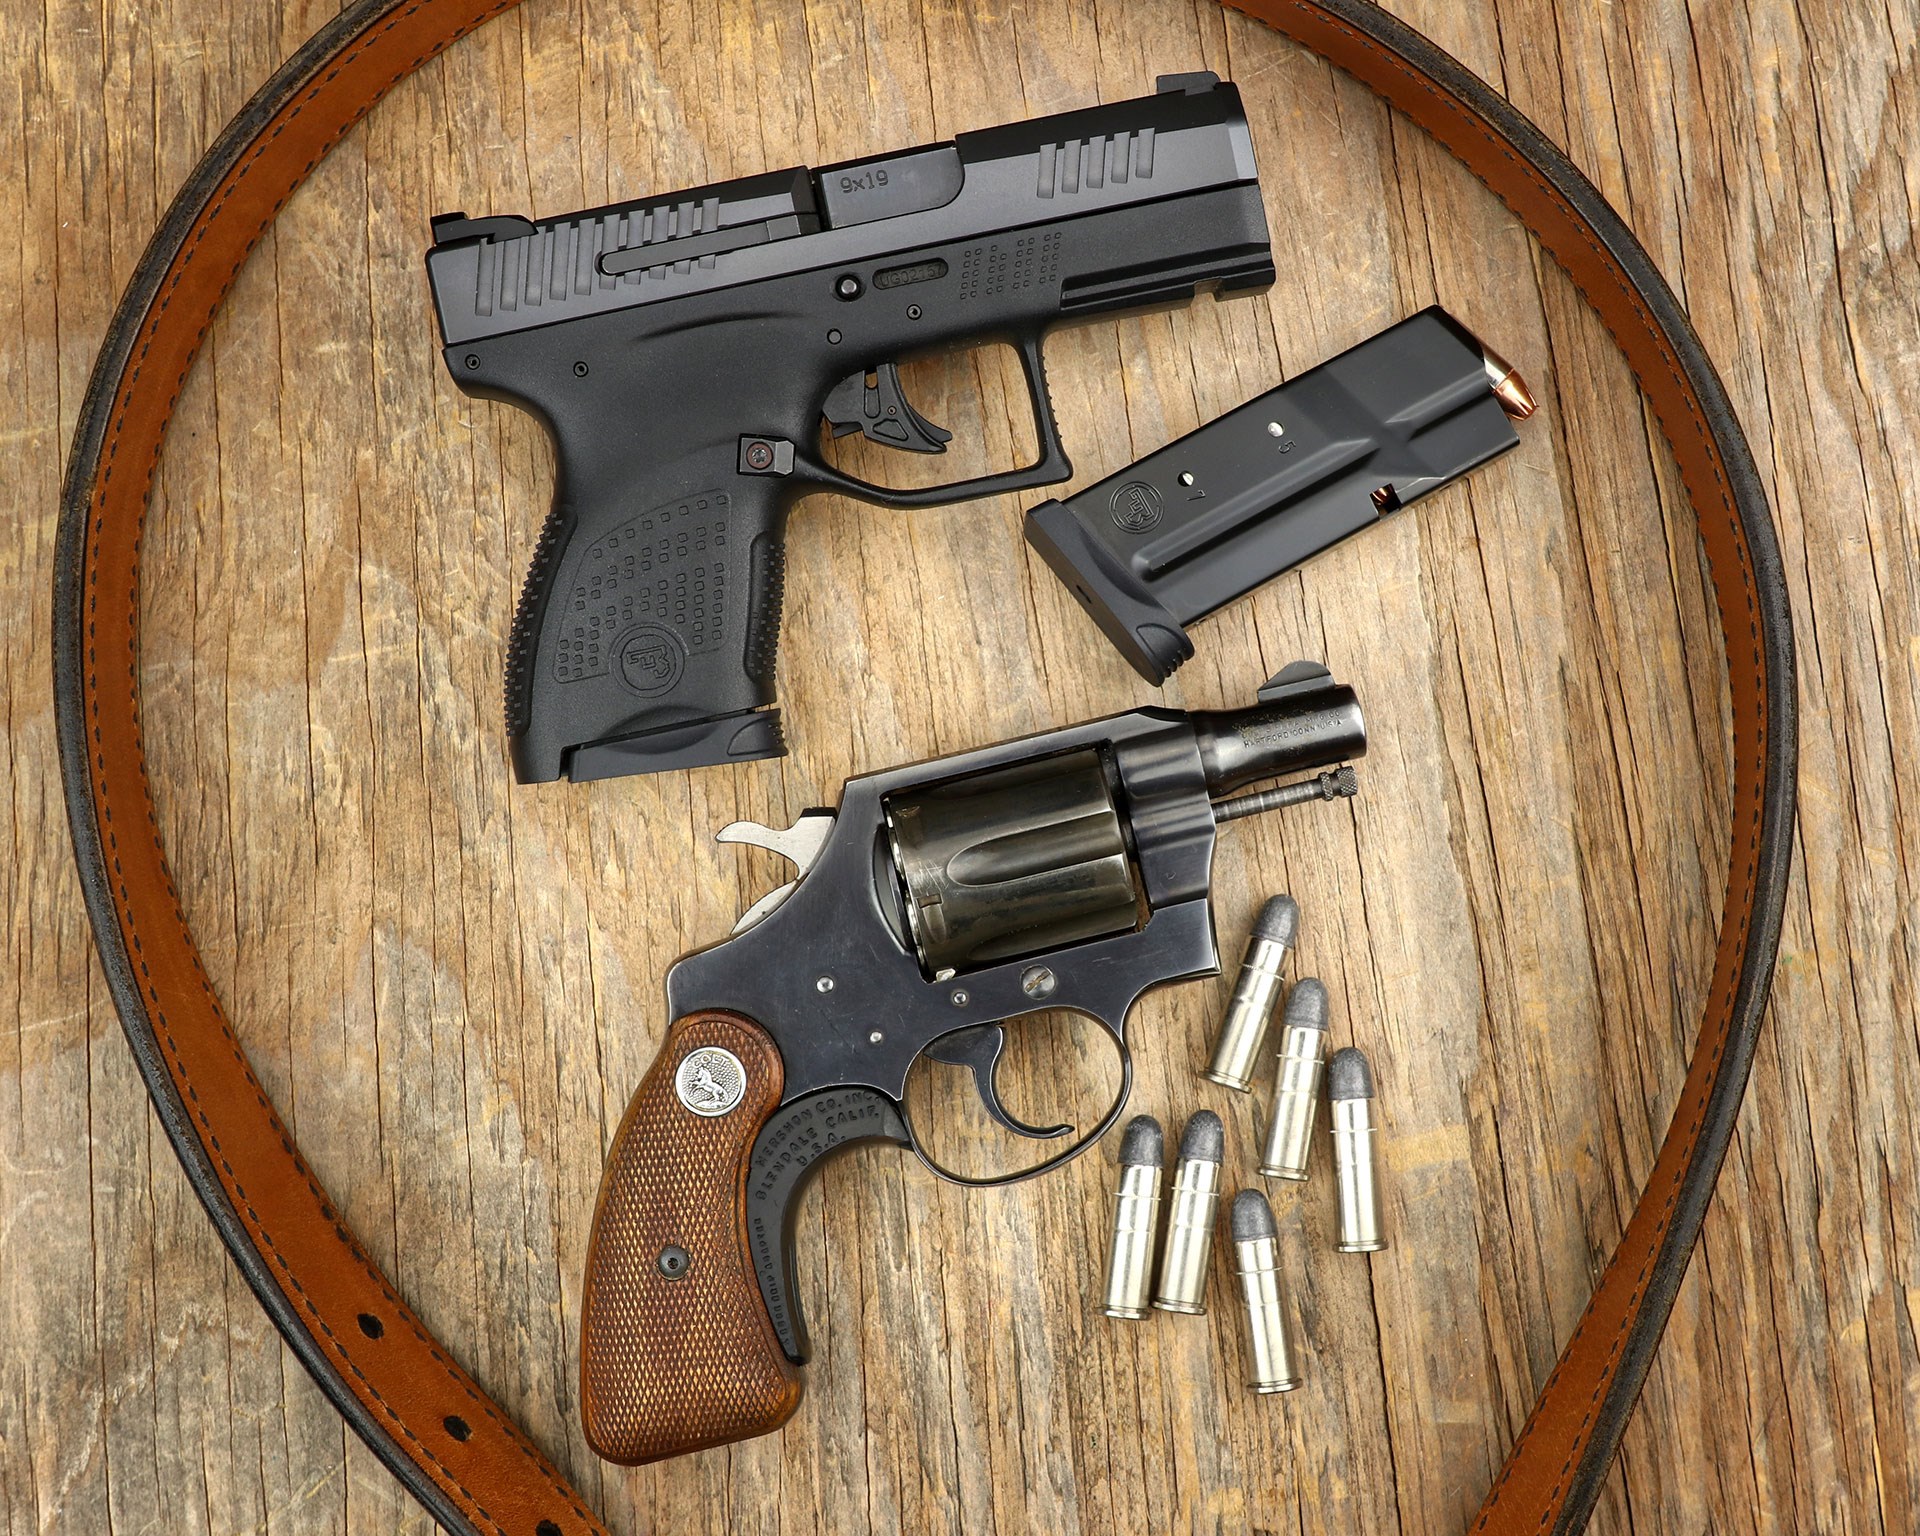 CZ P-10 M com pared with Colt revolver on tan background with brown leather belt, removed magazine and loose cartridges.